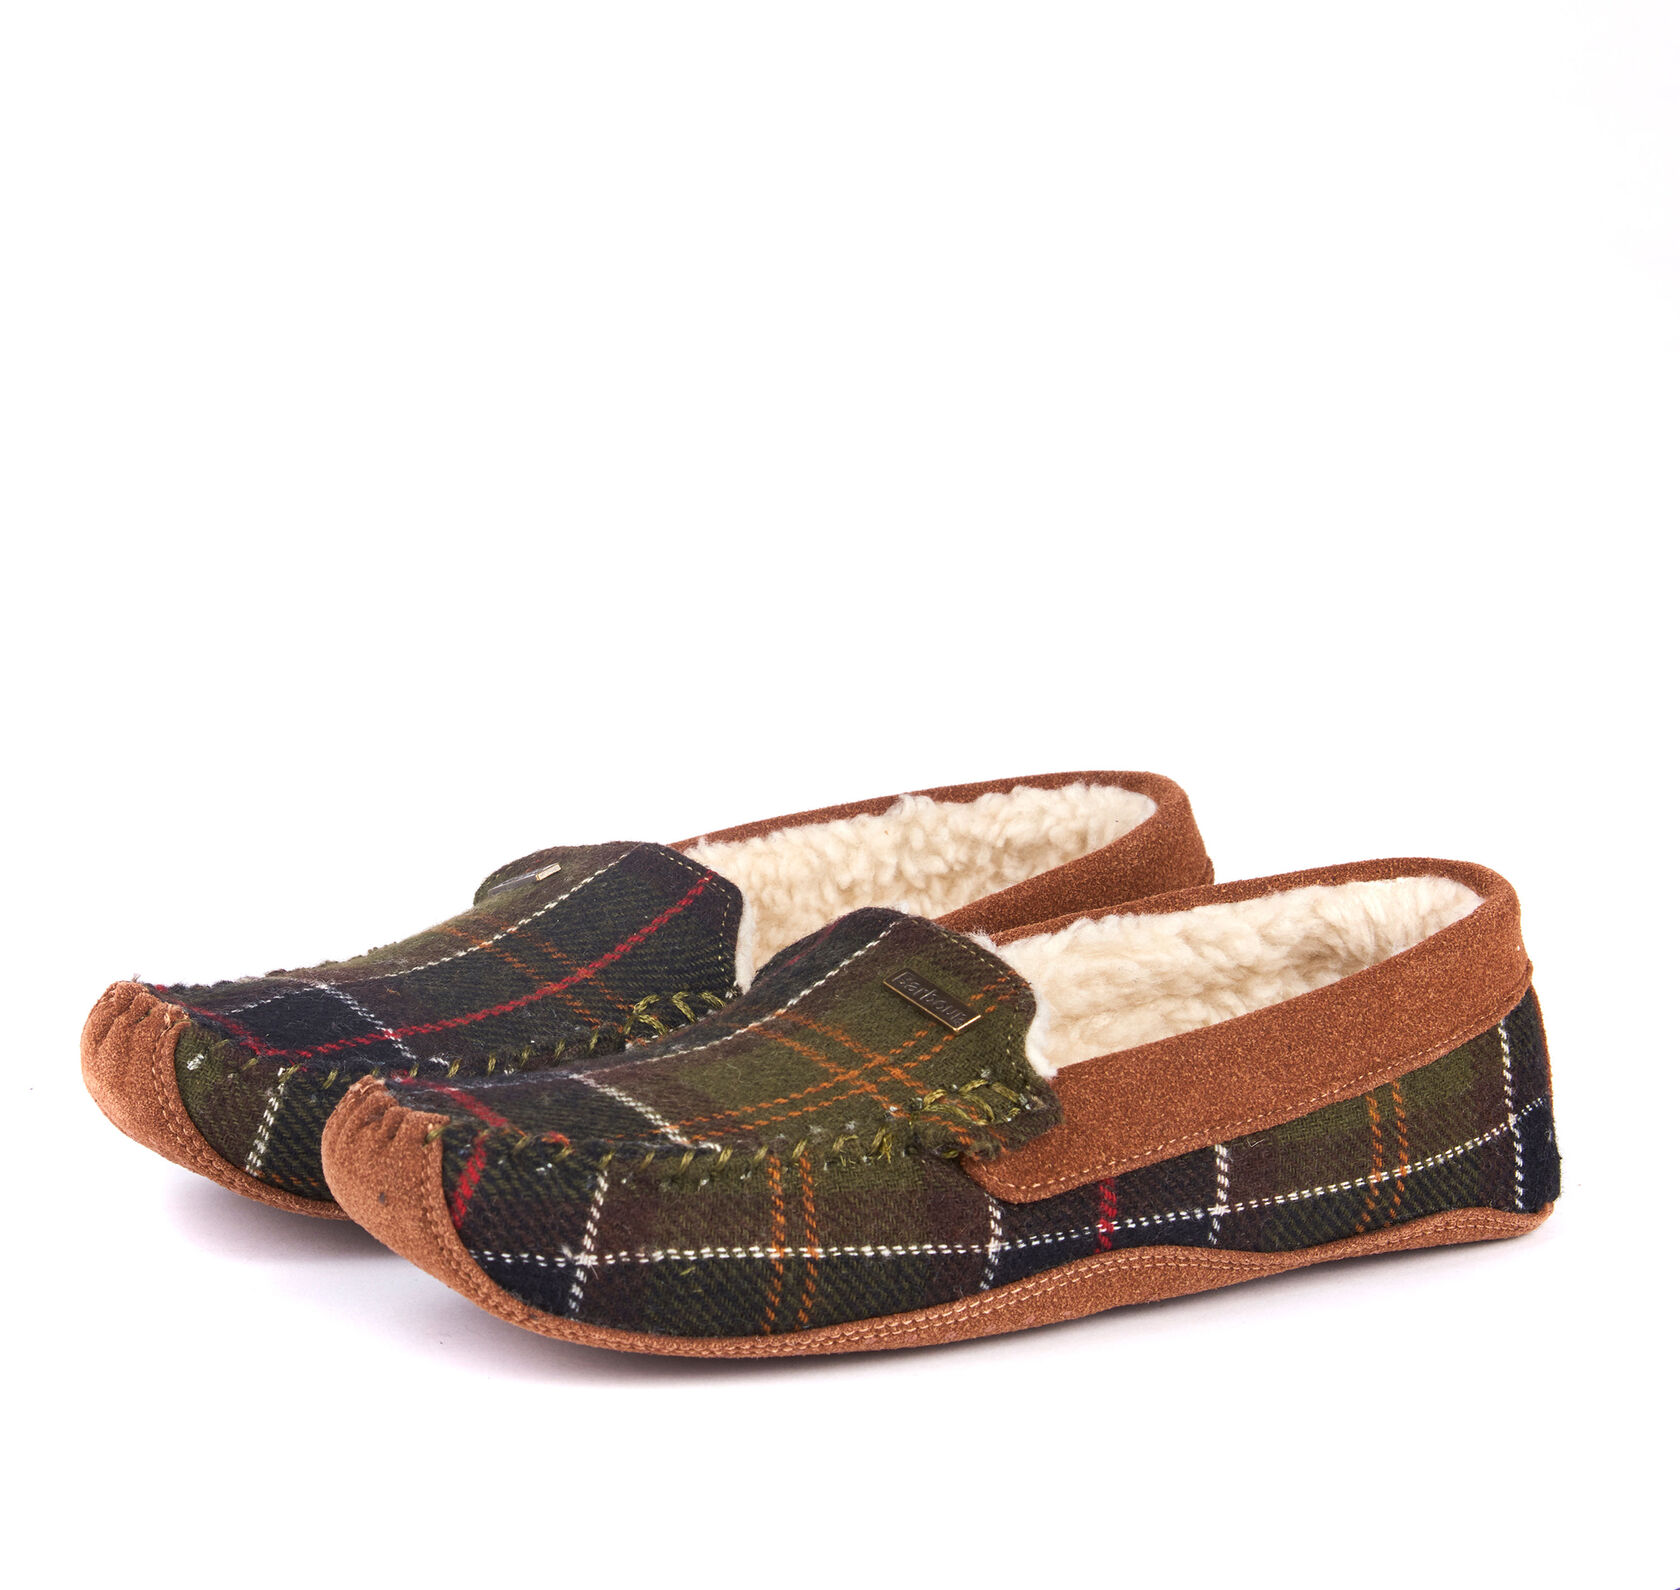 Barbour Betsy Moccasin Slippers-Classic